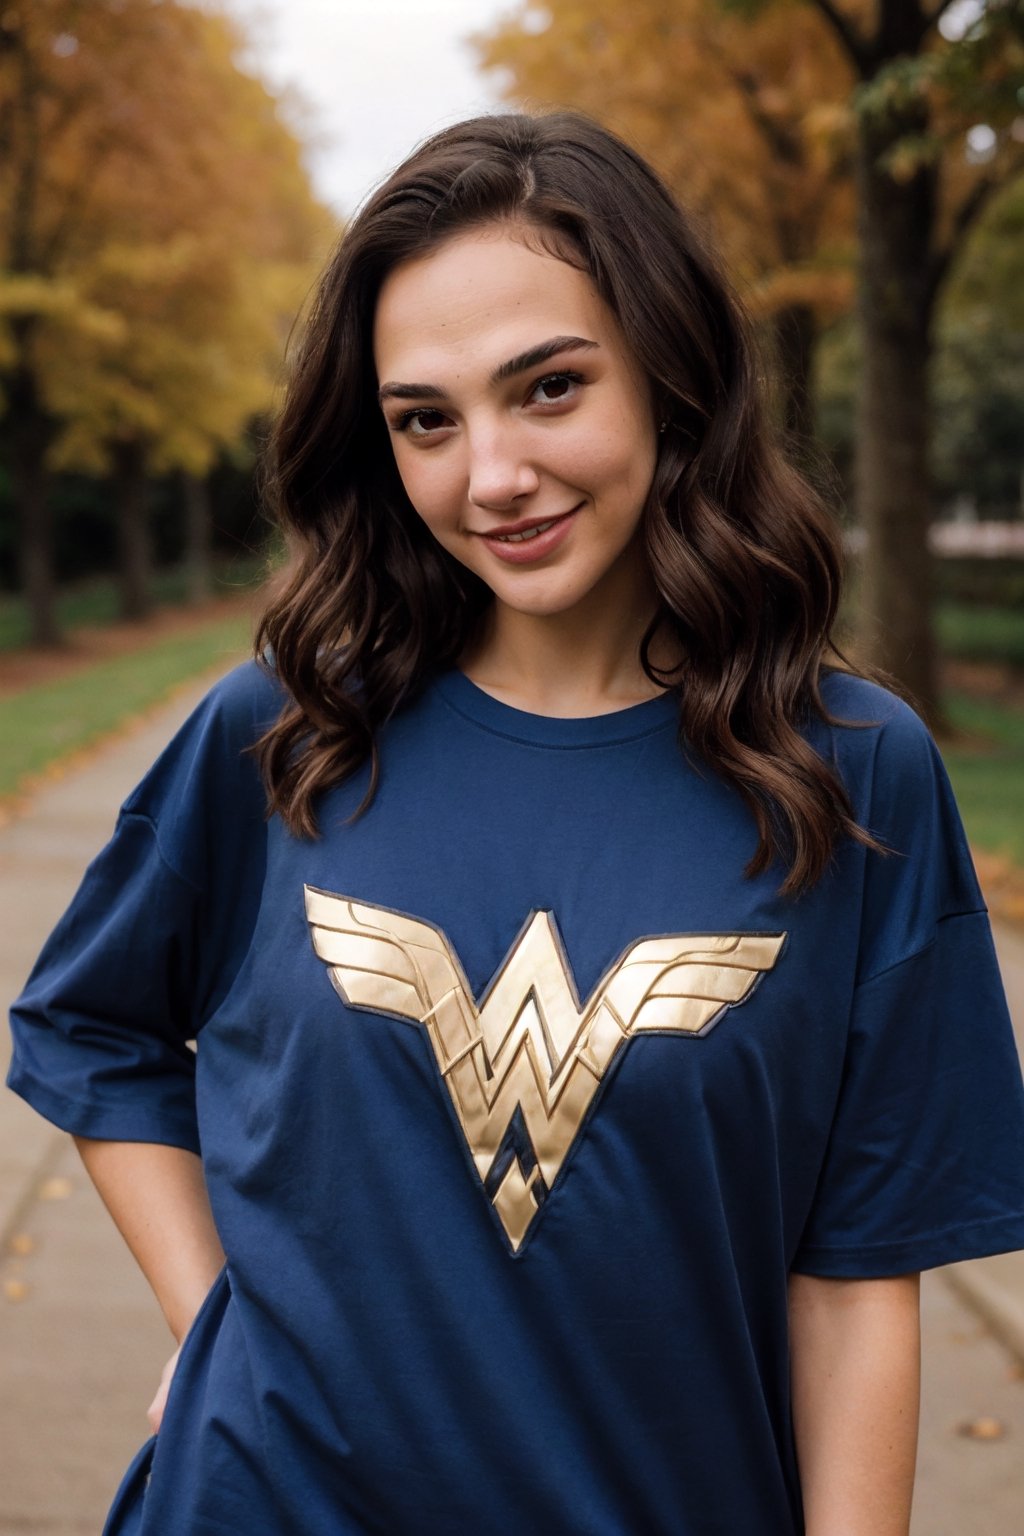 teen gal gadot, xxmix_girl, graininess, smile, cold, exposure, FilmGirl, 18_year_old, beautiful_girl, girl in oversize t-shirt custume, The t-shirt has the wonder woman logo, realhands, curly_hair, brown_hair,L inkGirl, 1 girl